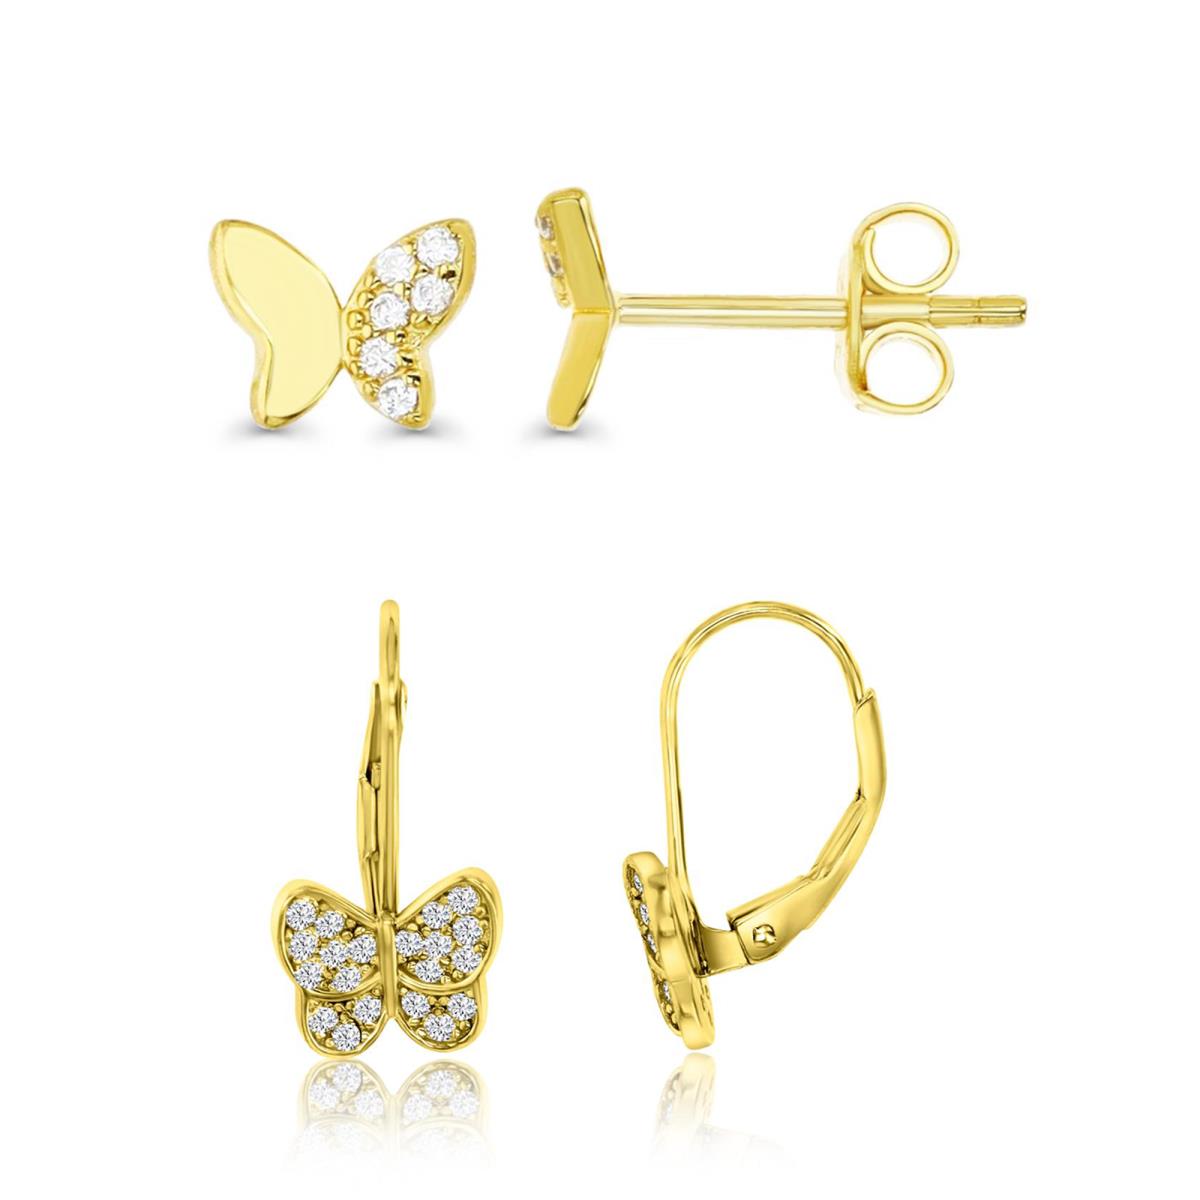 Sterling Silver Yellow 6X5MM &18X9MM Polished White CZ Butterfly Stud/Lever Back Earrings Set